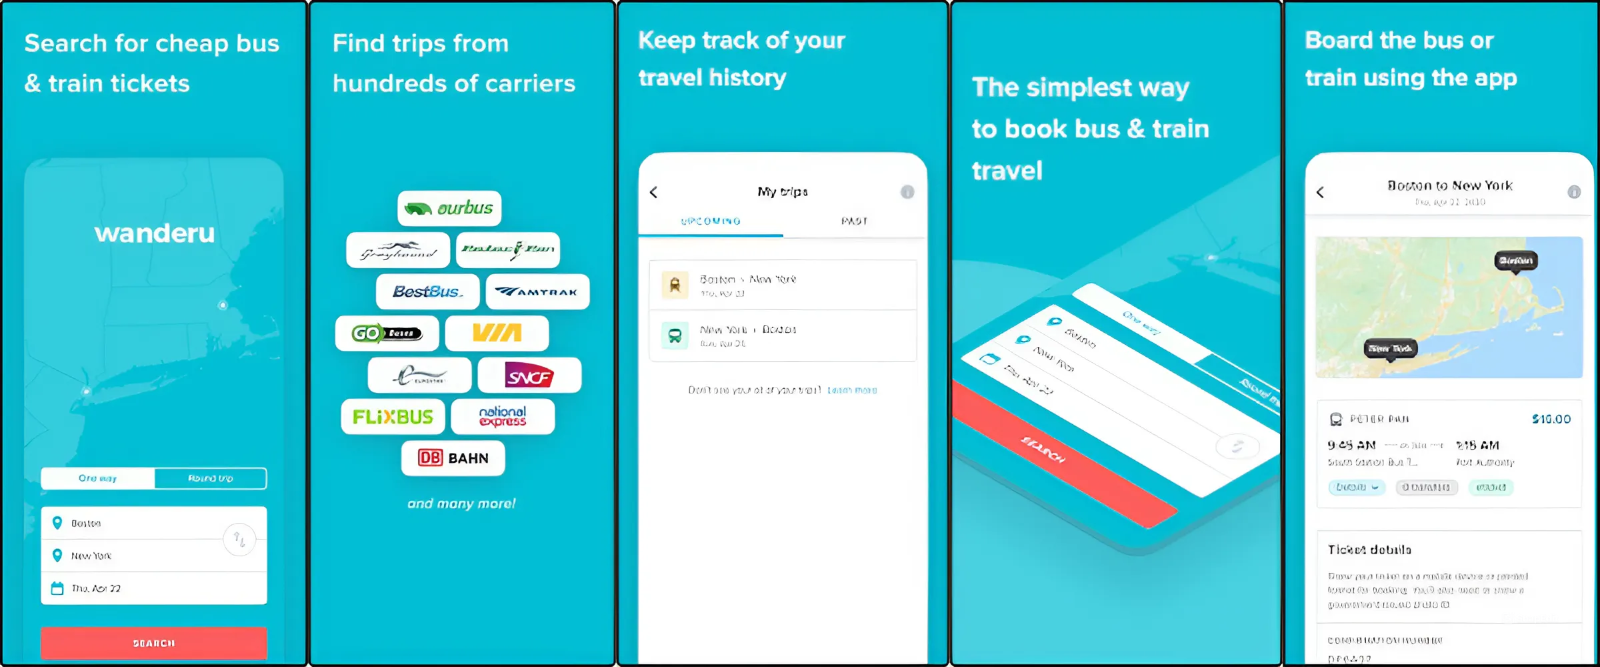 Features of the Wanderu: Bus & Train Tickets